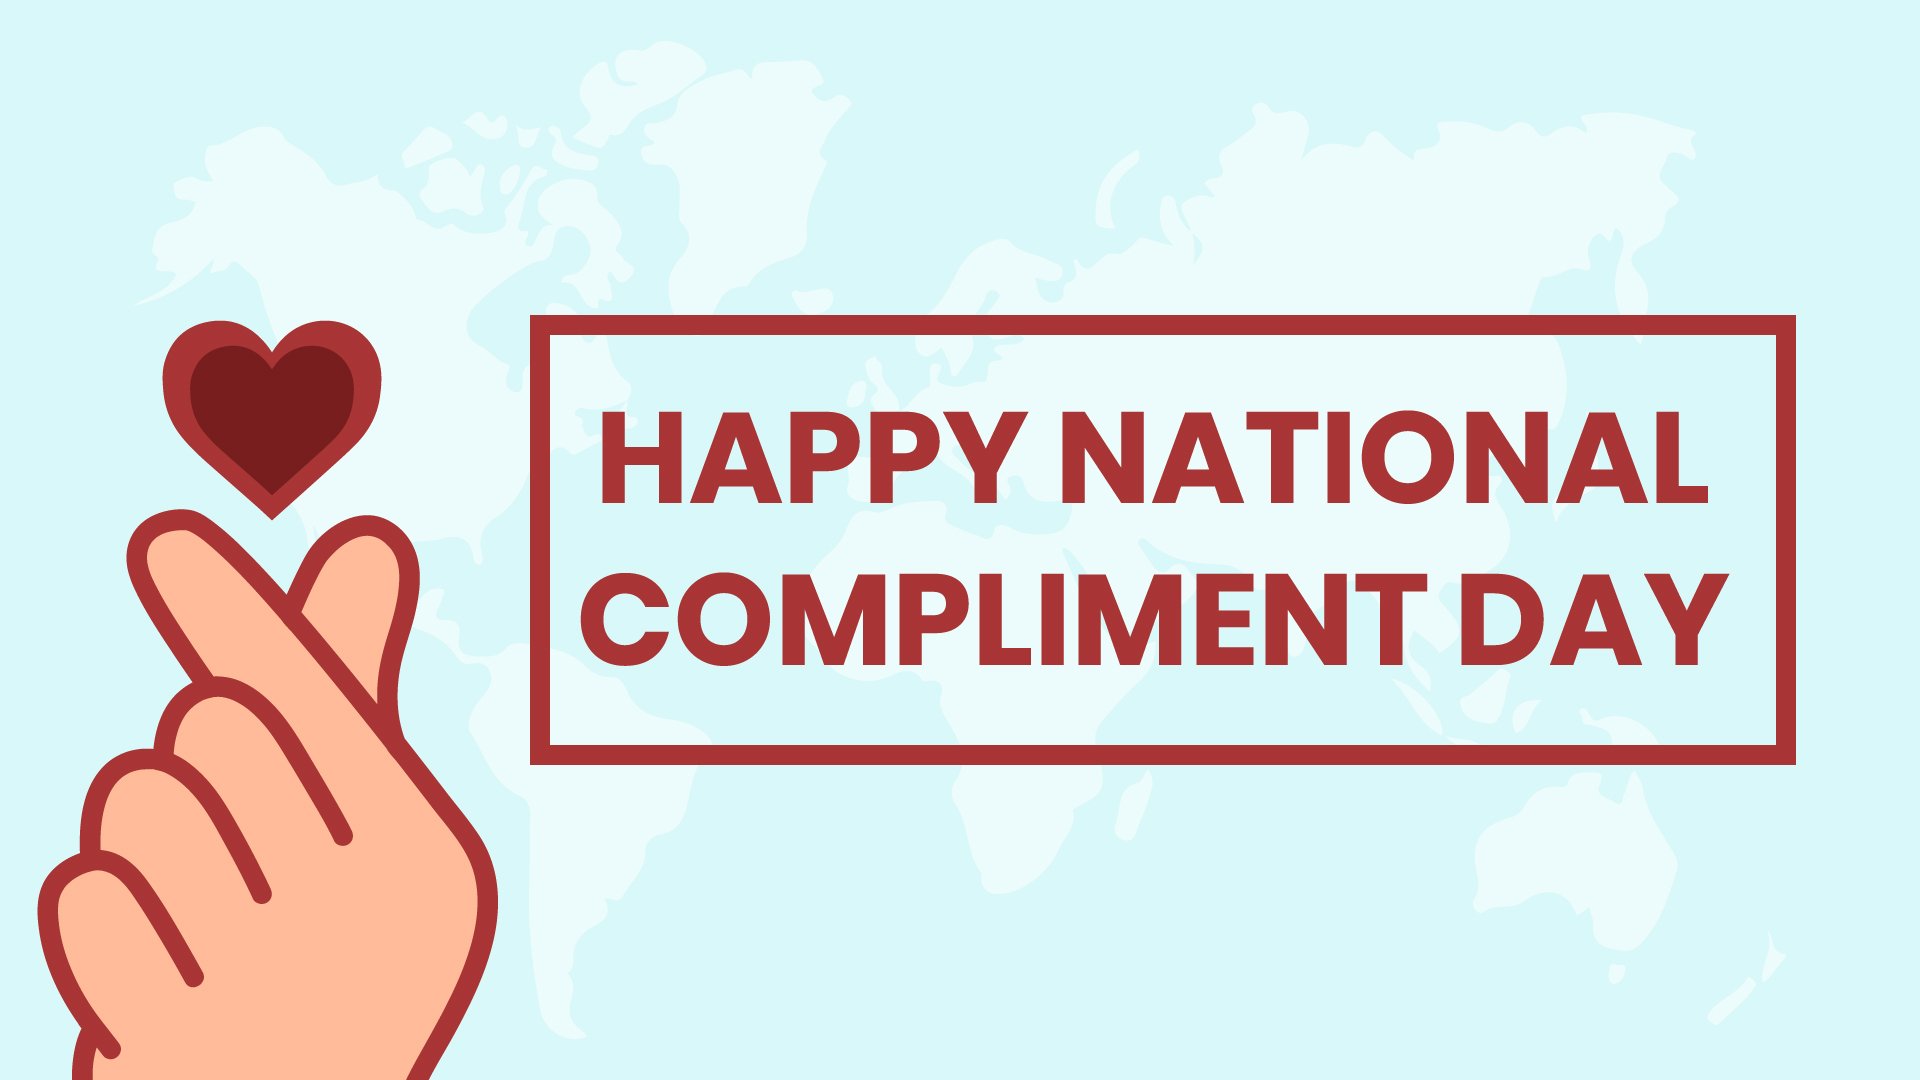 National Compliment Day Background